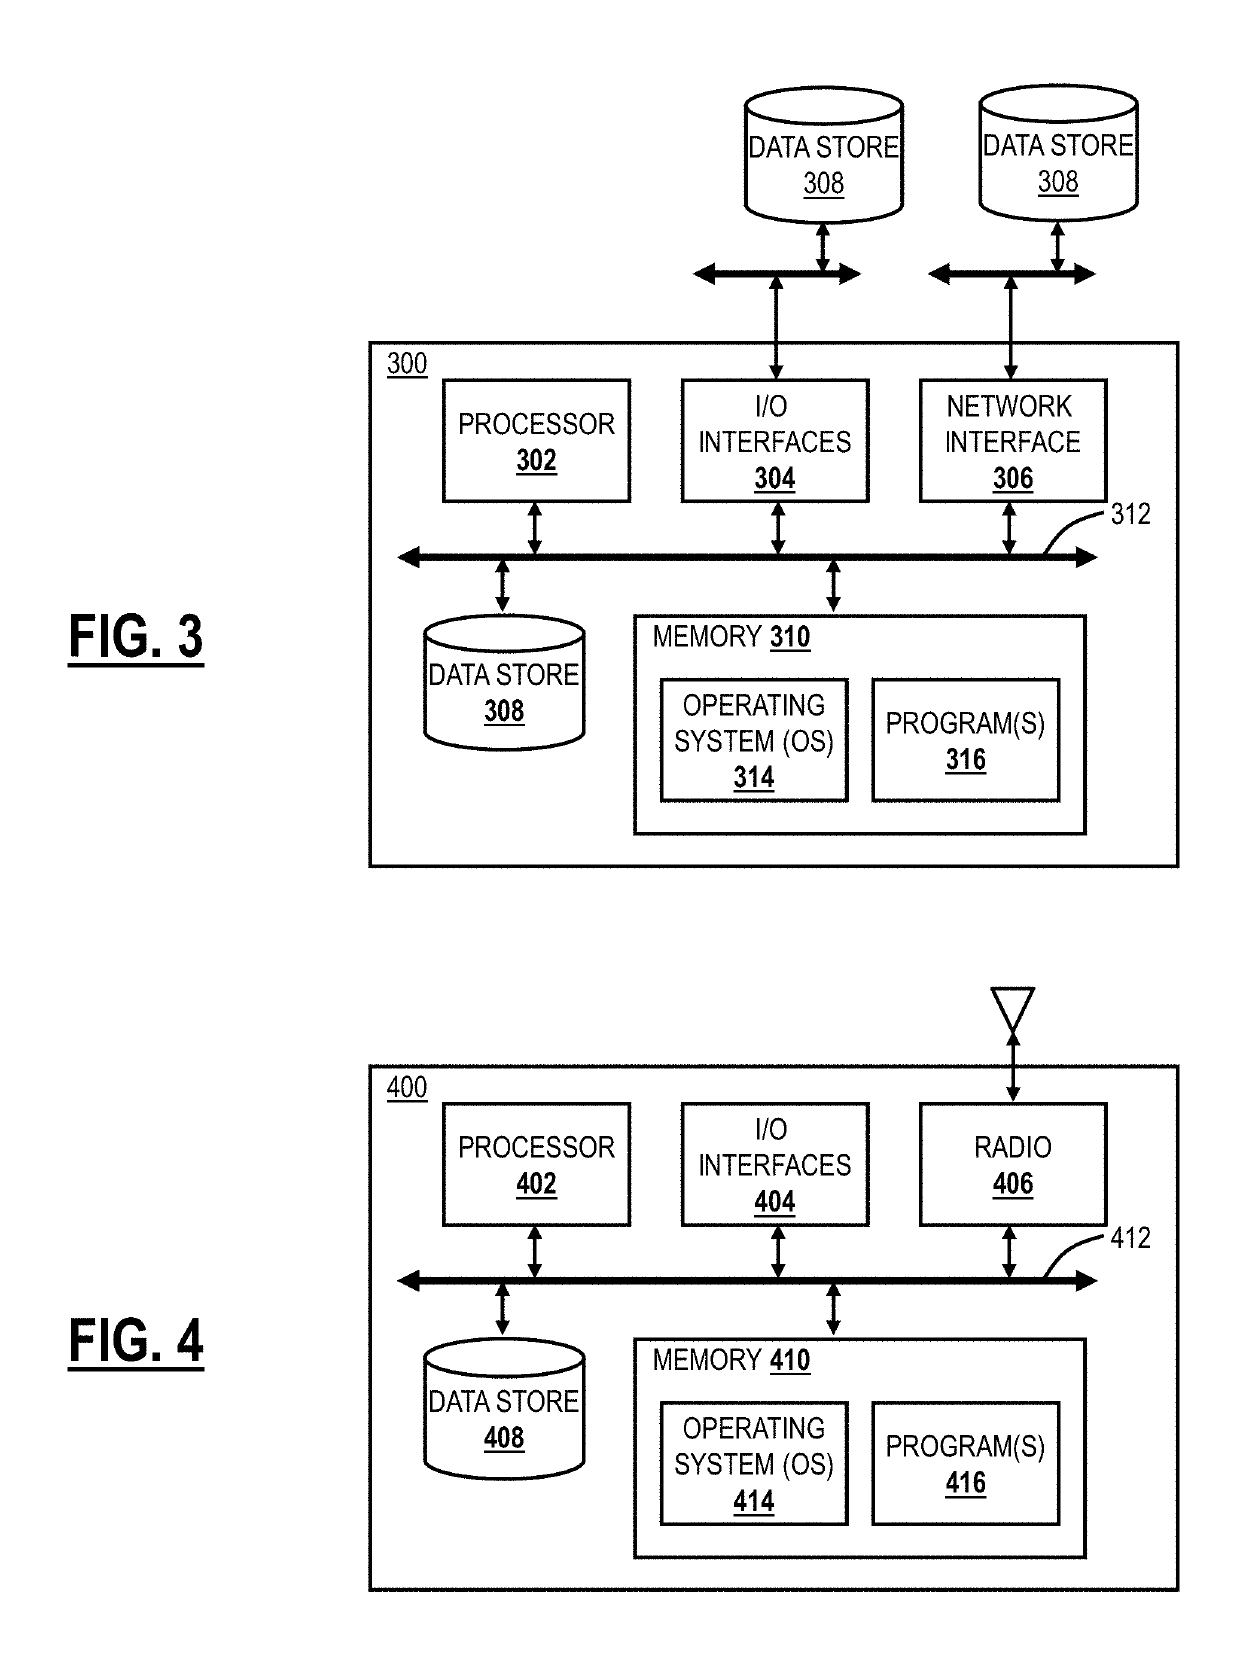 Multidimensional risk profiling for network access control of mobile devices through a cloud based security system